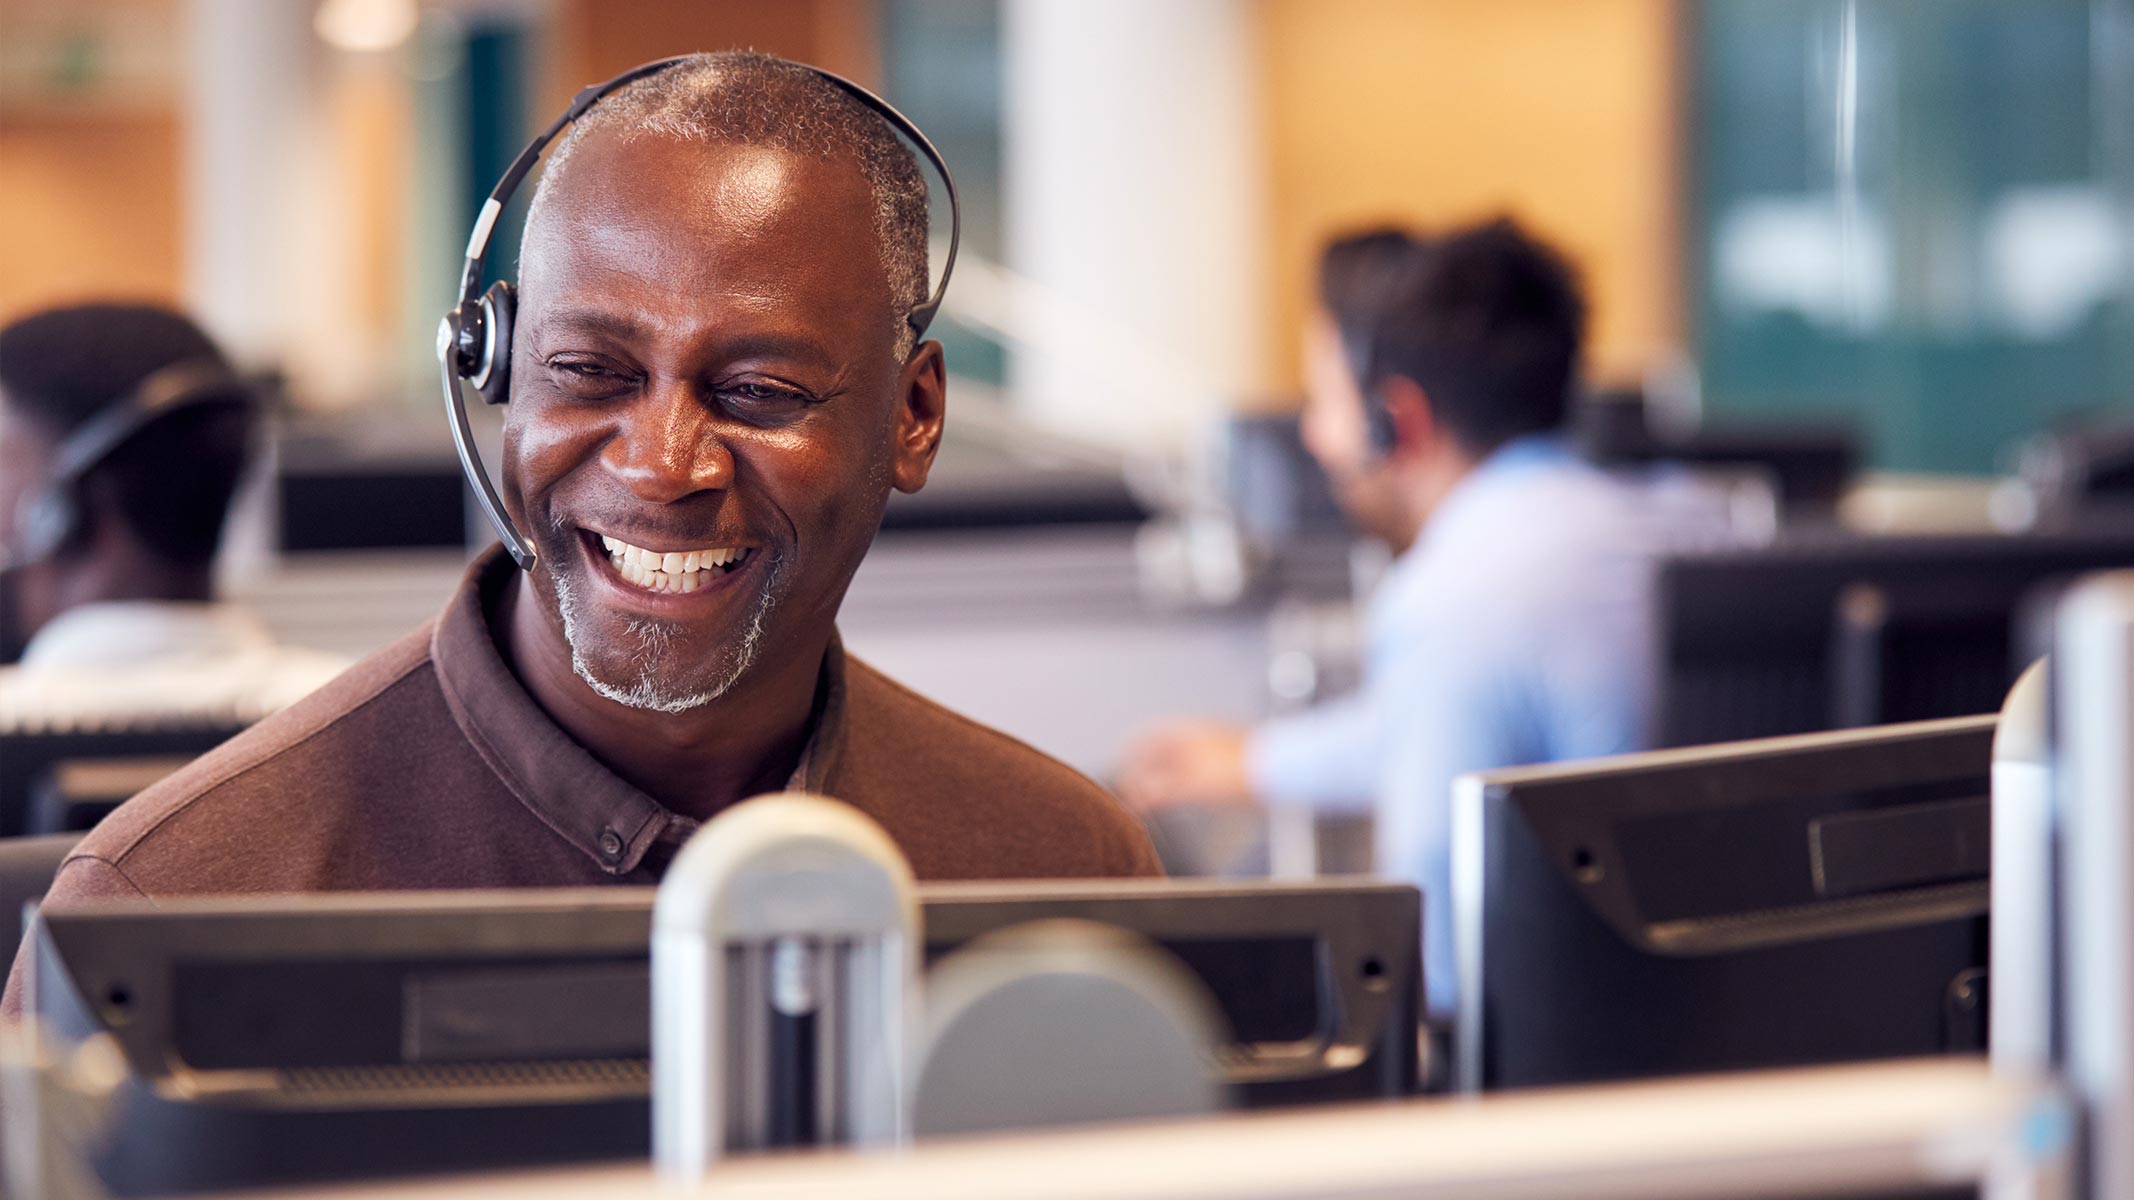 Customer service rep smiling on headset